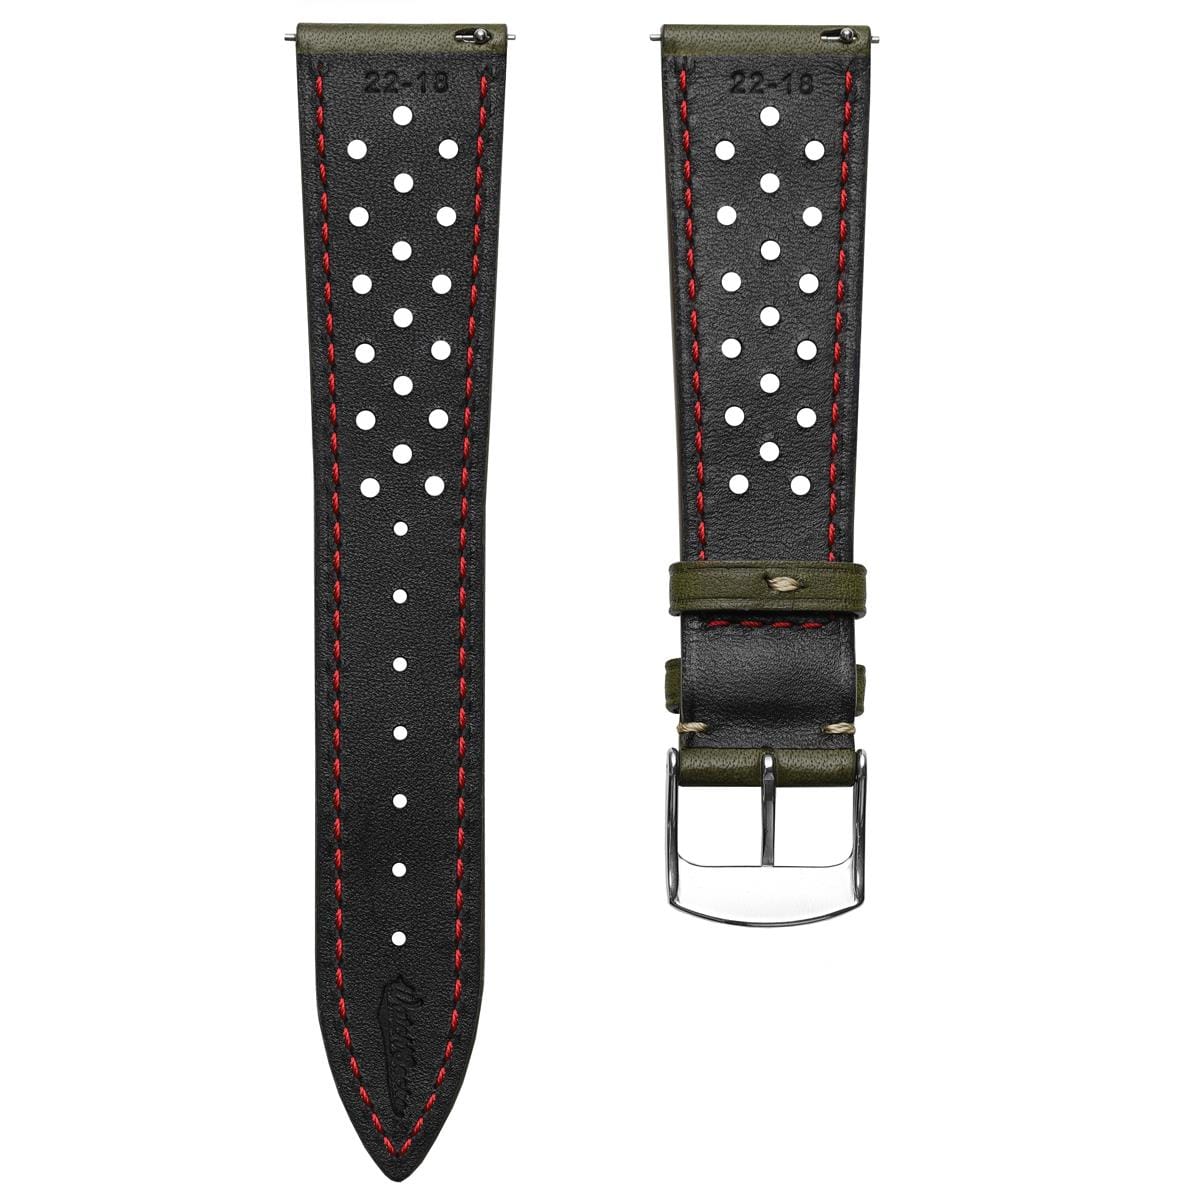 Beaufort Racing Badalassi Carlo Minerva Box Leather Perforated Watch Strap - Olive Green